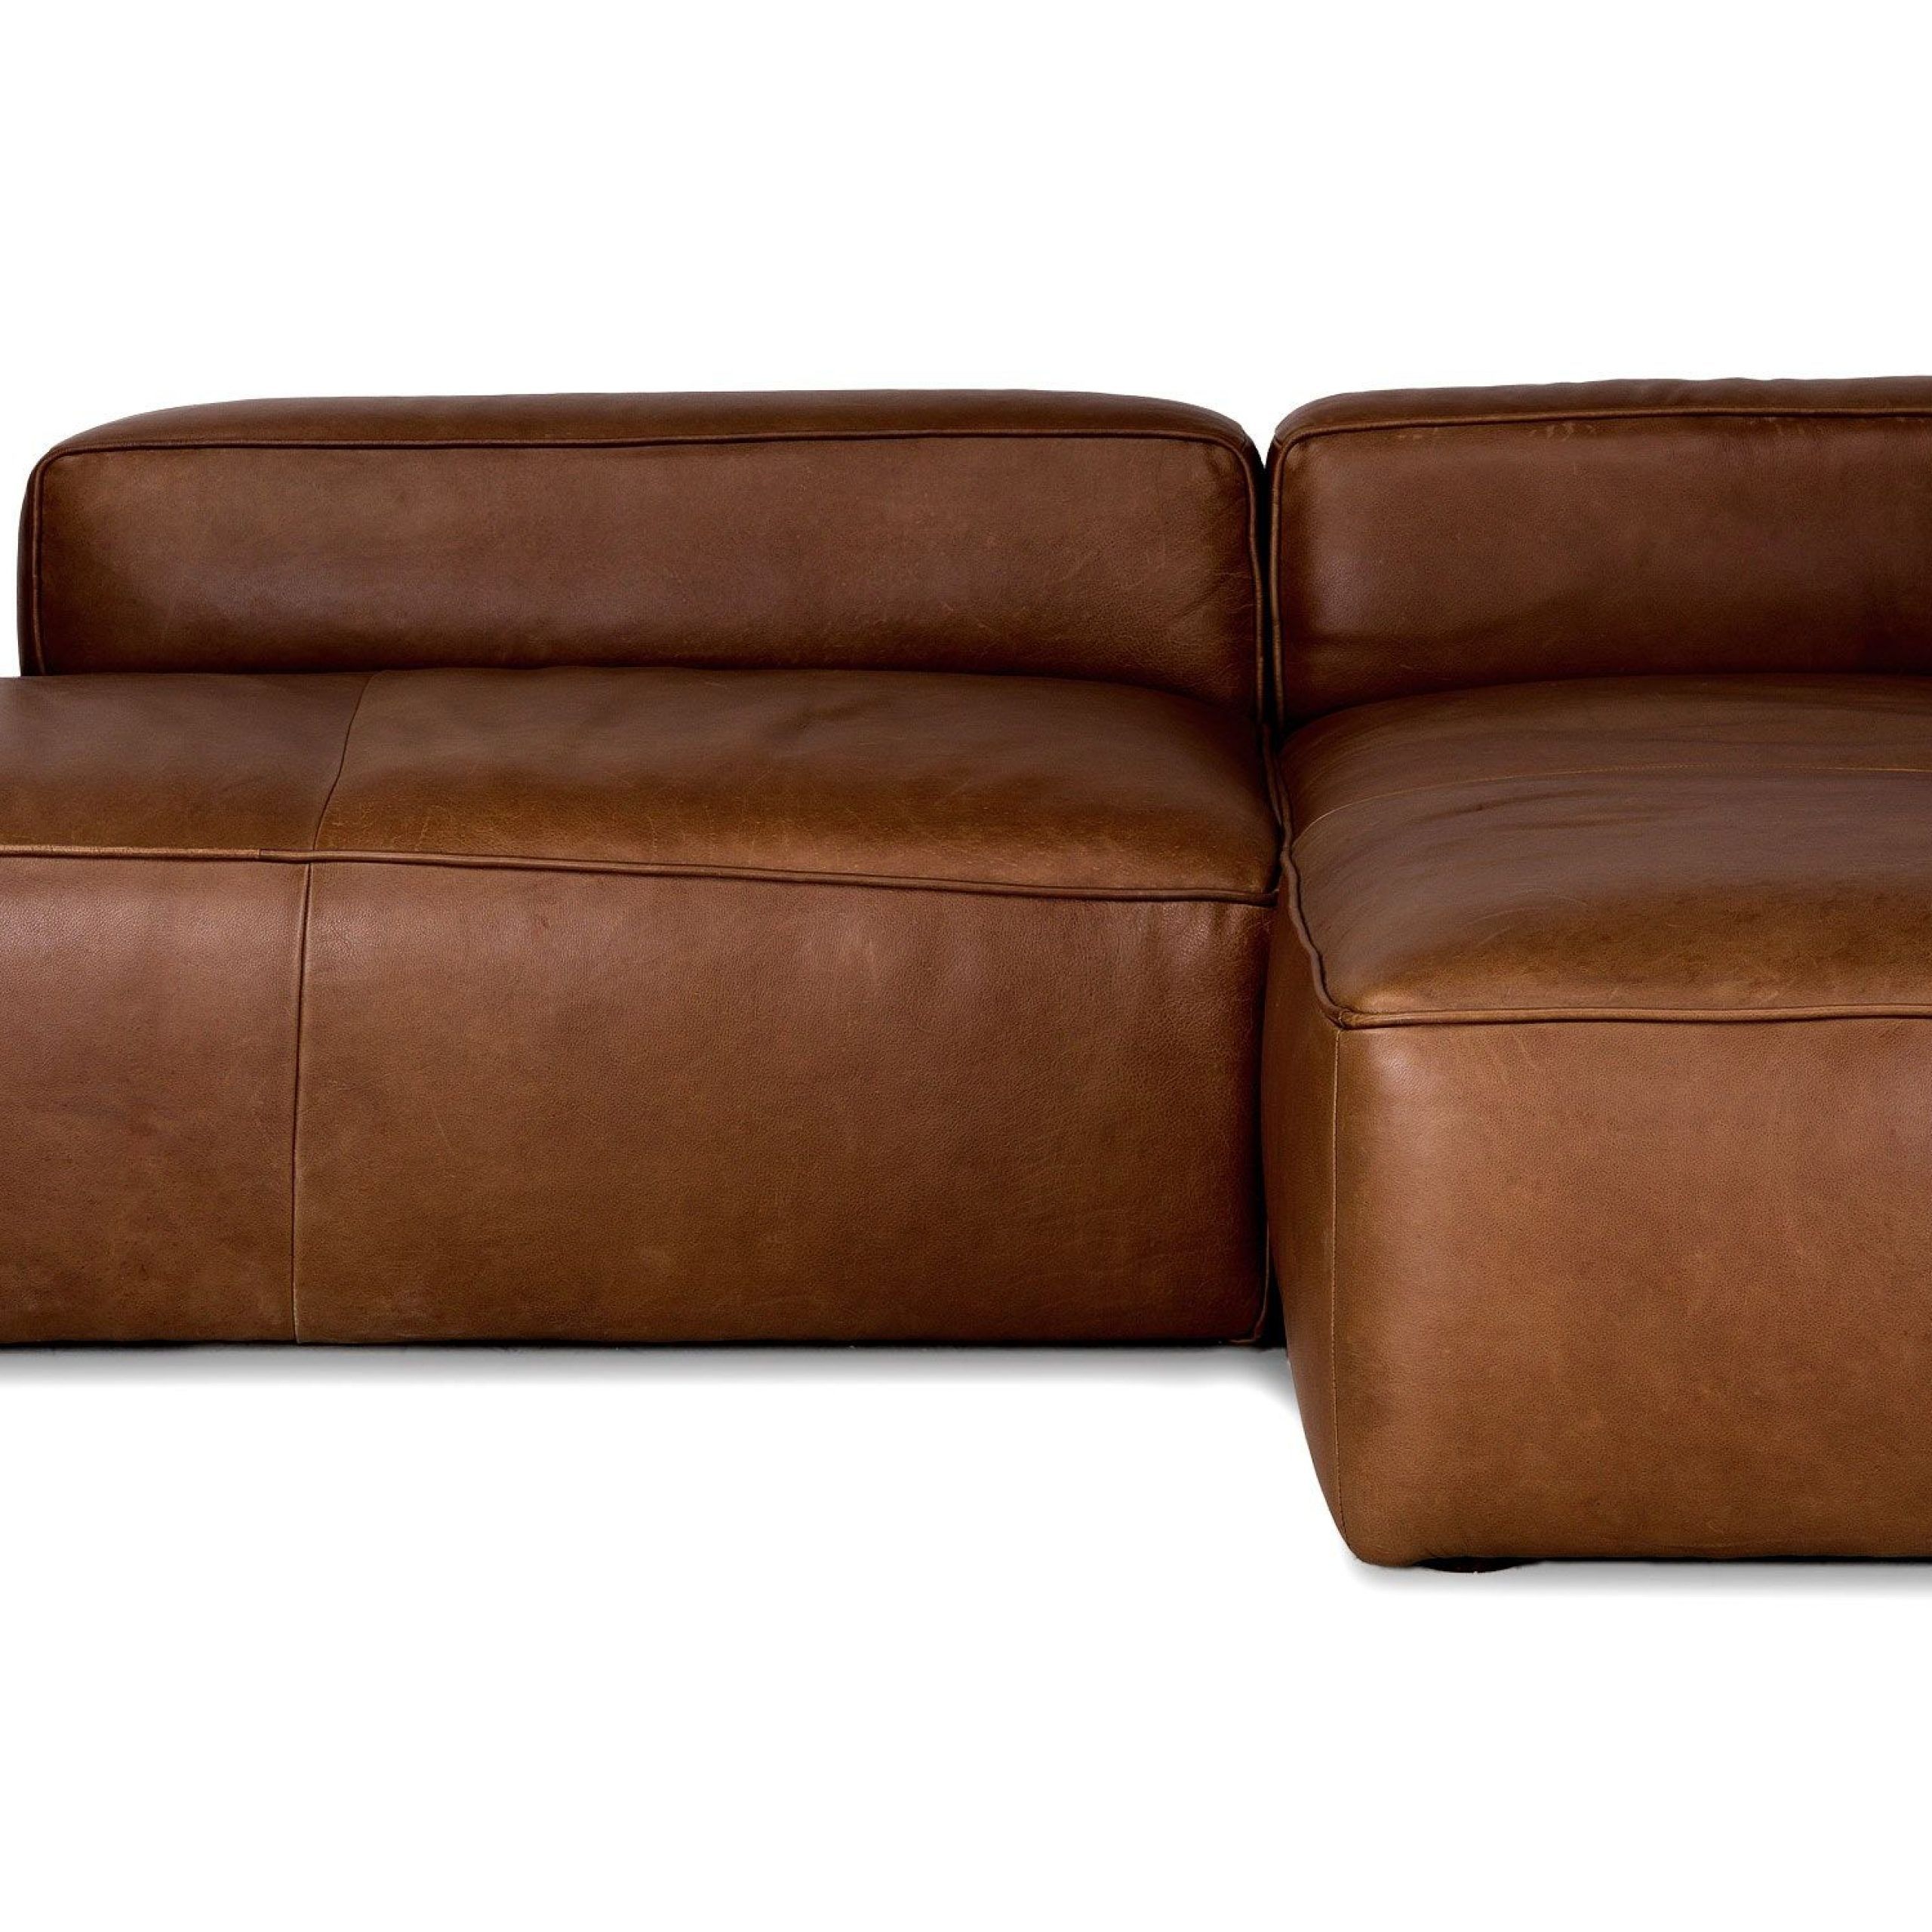 Mello Taos Brown Right Sectional | Mid Century Modern Sofa Pertaining To Florence Mid Century Modern Right Sectional Sofas (View 15 of 15)